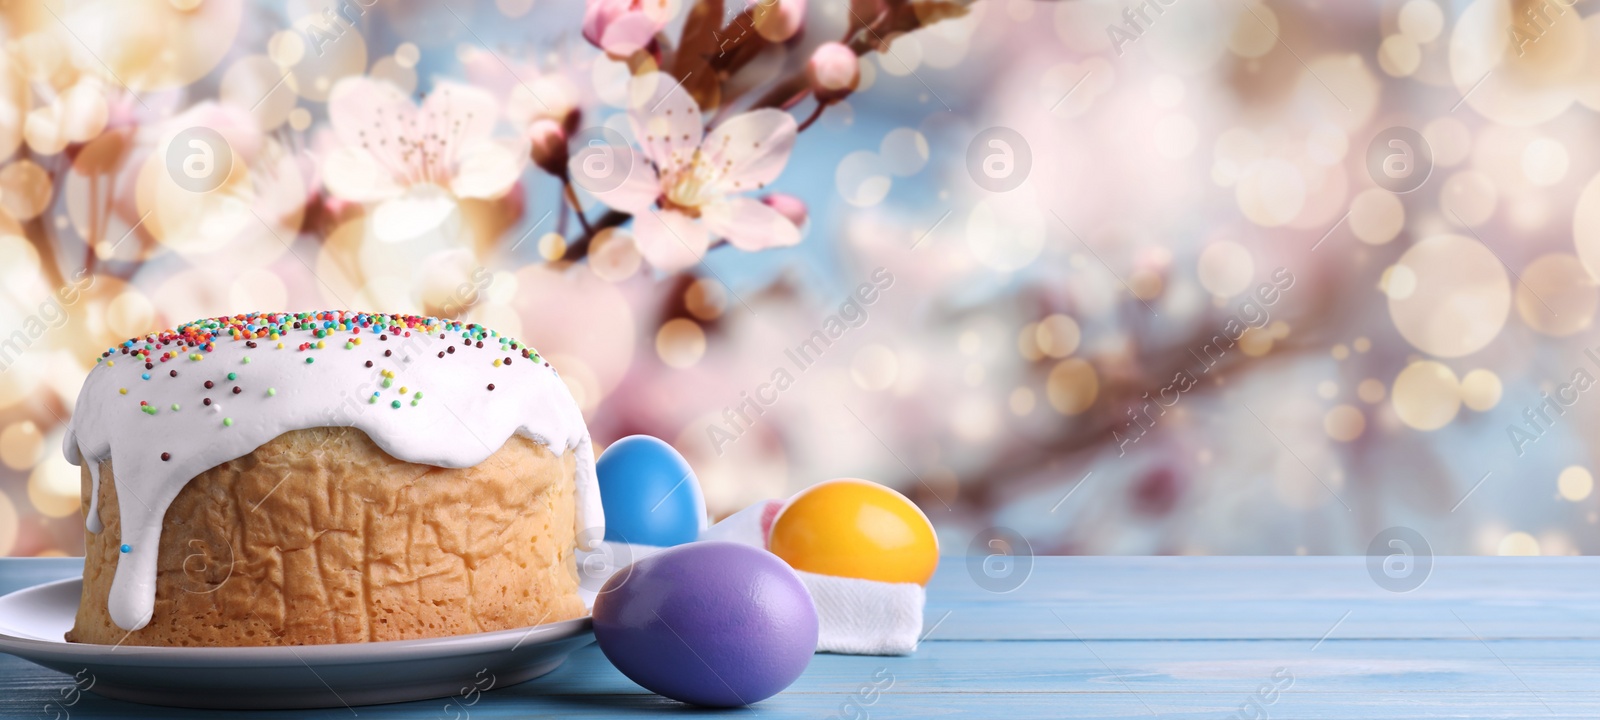 Image of Traditional Easter cake and eggs on wooden table outdoors, space for text. Banner design